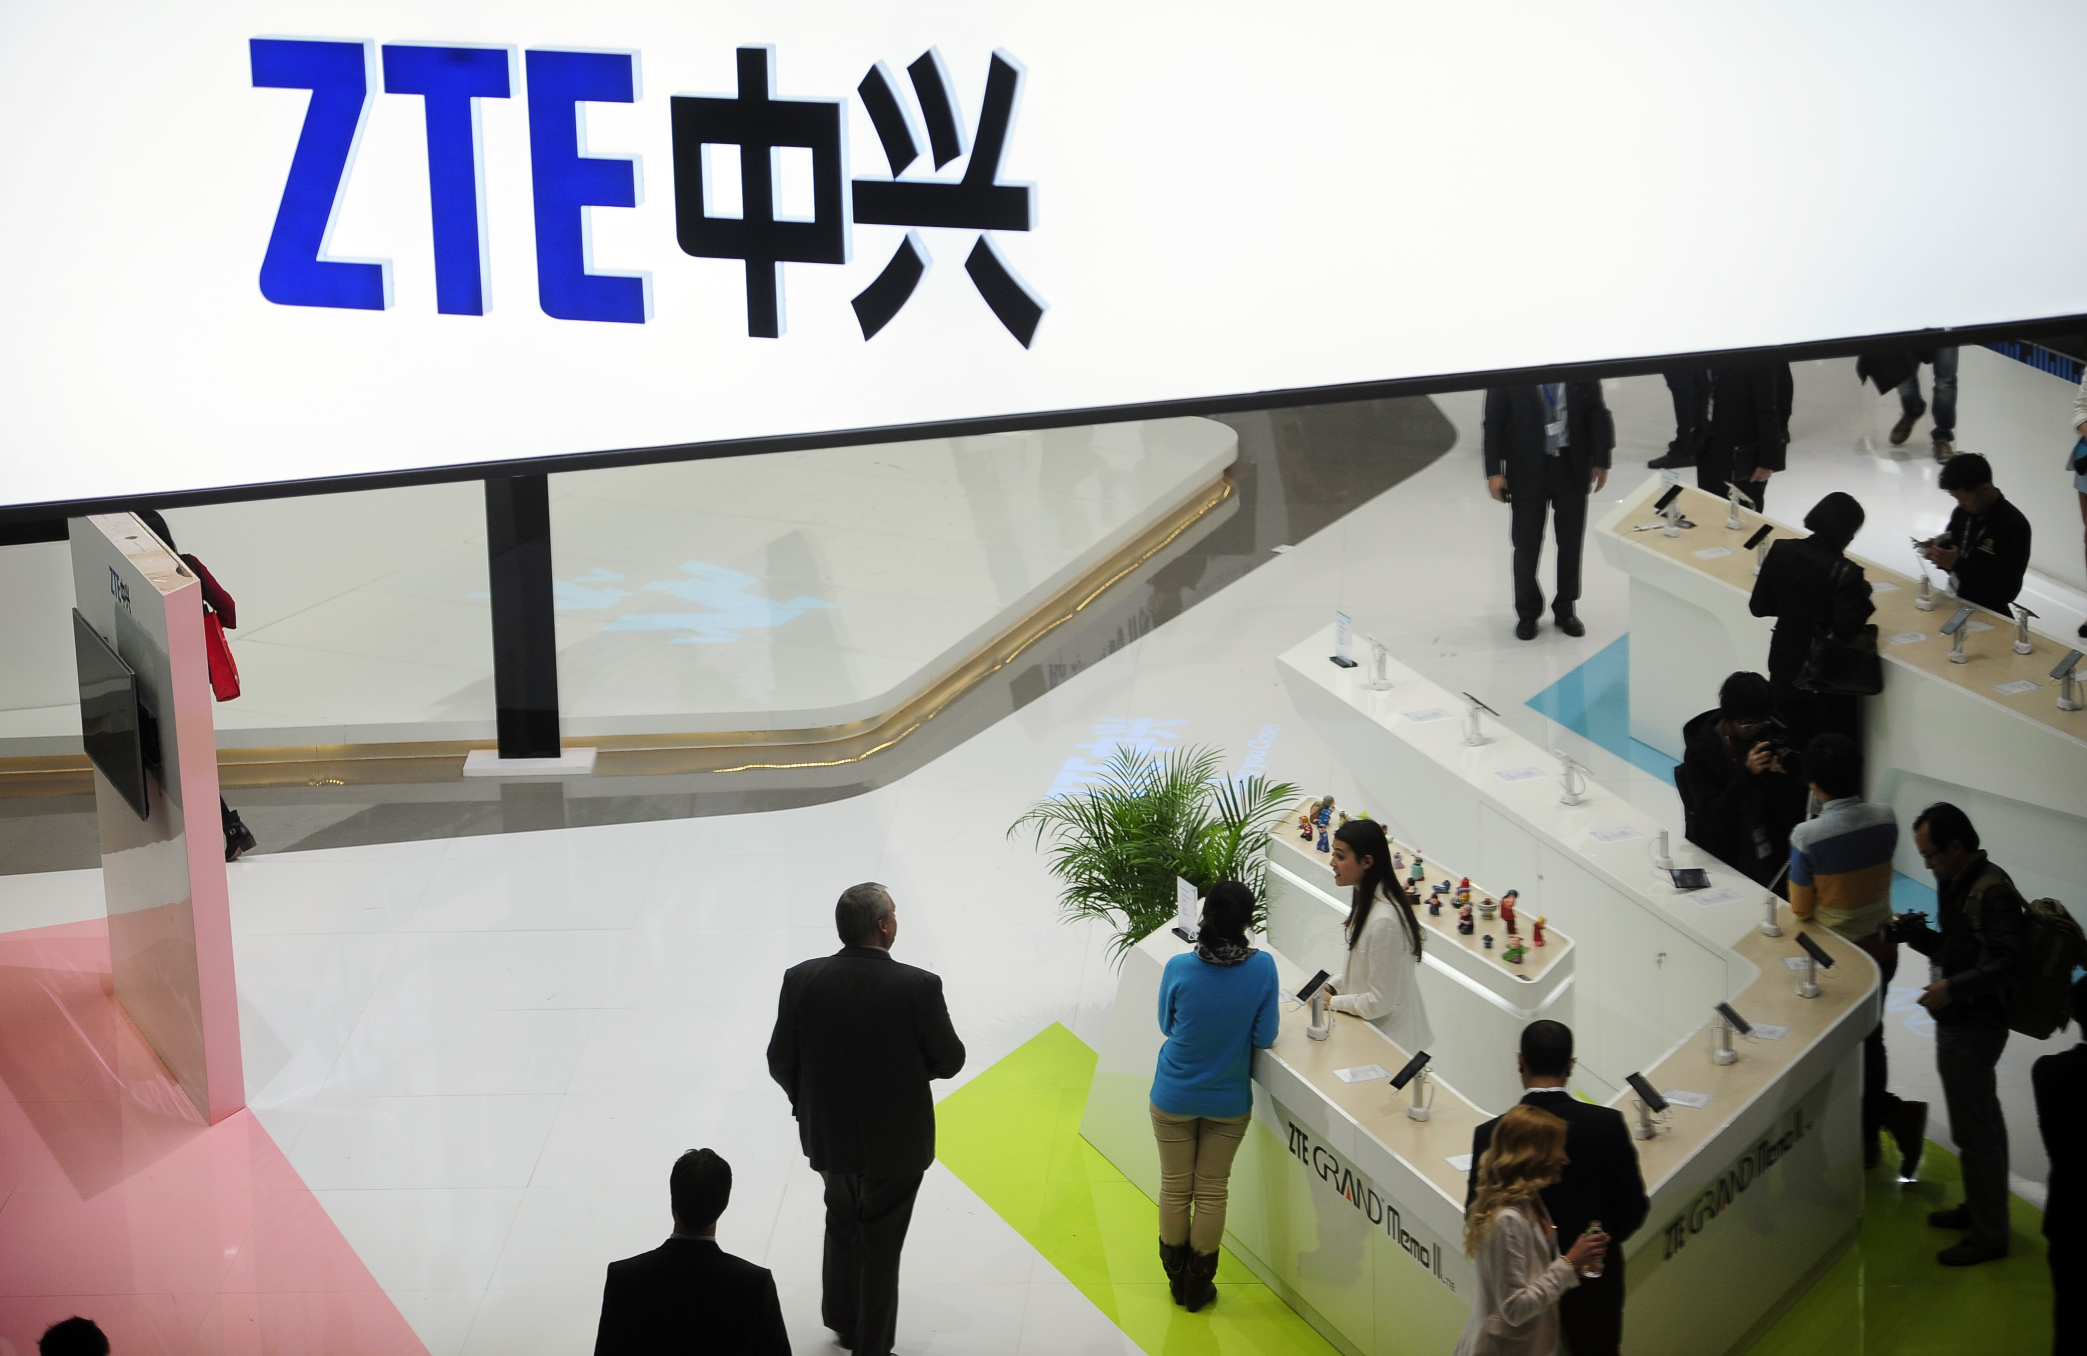 People gather at the ZTE booth at the Mobile World Congress, the world's largest mobile phone trade show in Barcelona, Spain. Photo: AP